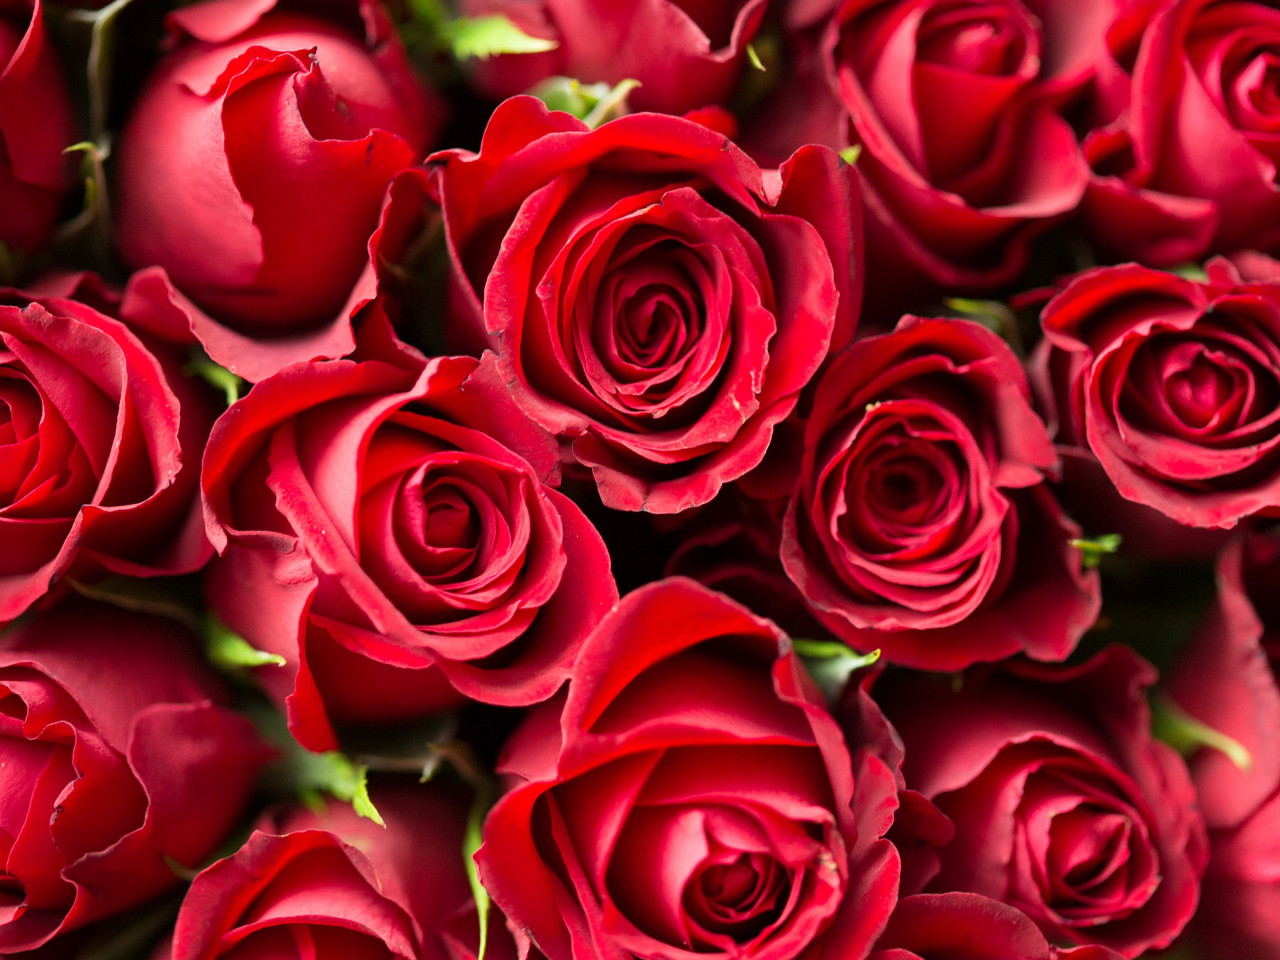 Lots of red roses wallpaper 1280x960